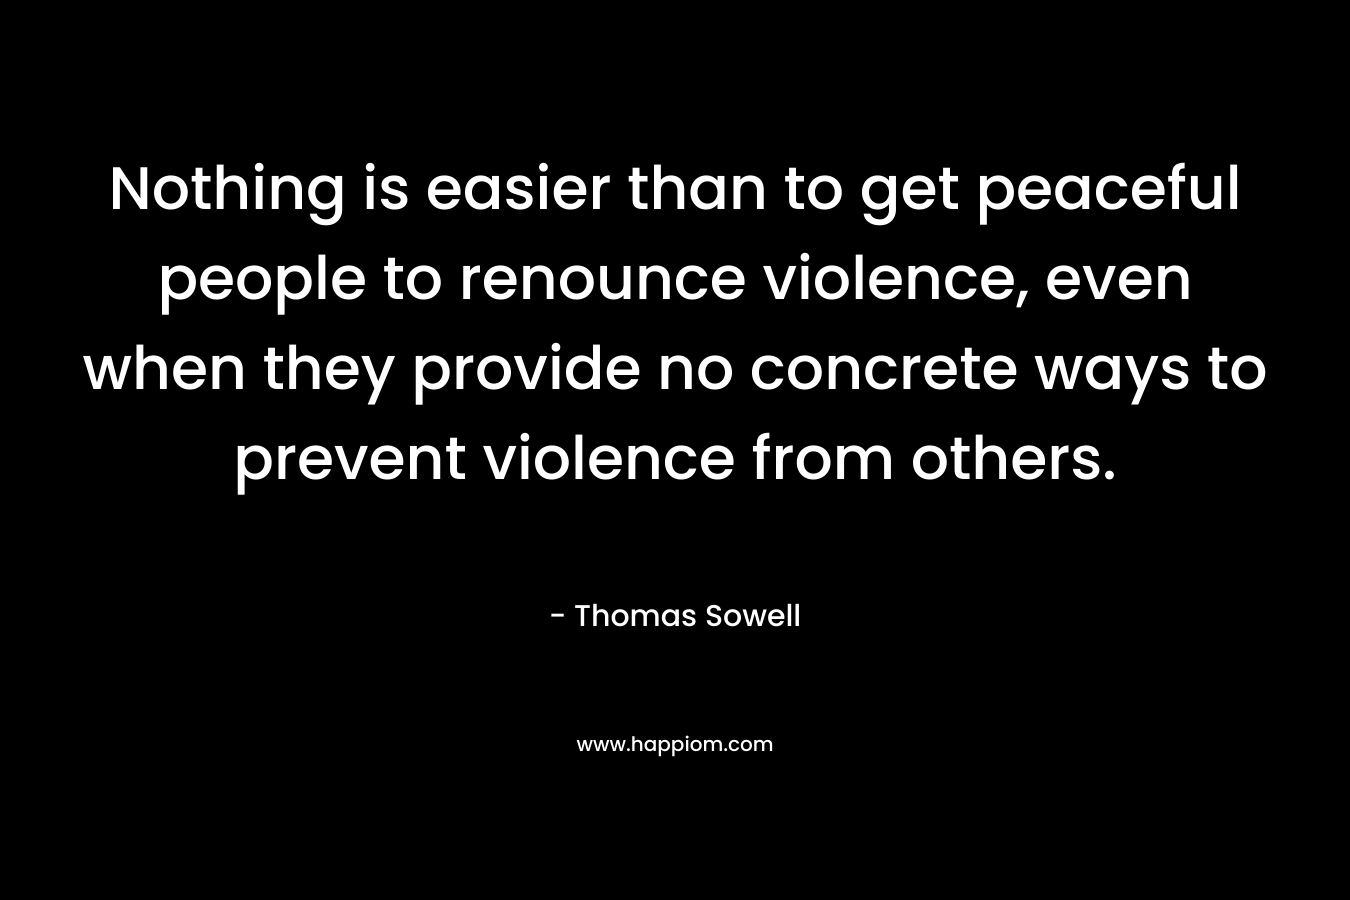 Nothing is easier than to get peaceful people to renounce violence, even when they provide no concrete ways to prevent violence from others. – Thomas Sowell